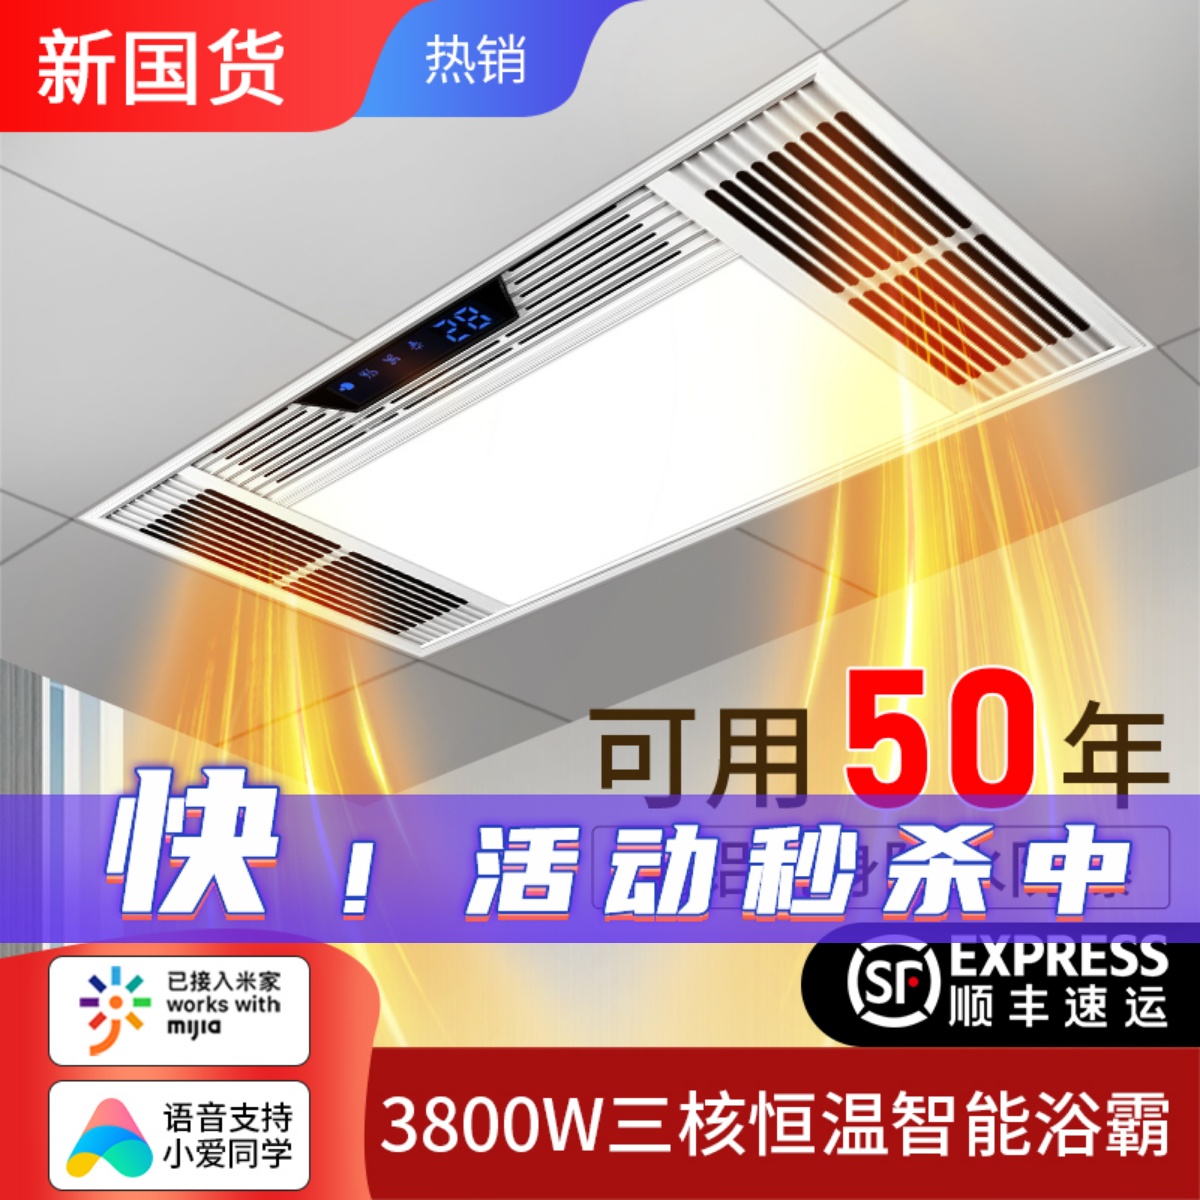 Wind Warm Bath Bully Integrated ceiling Five-in-one Mijia Voice toilet exhaust fan lighting lamp for heating blower-Taobao